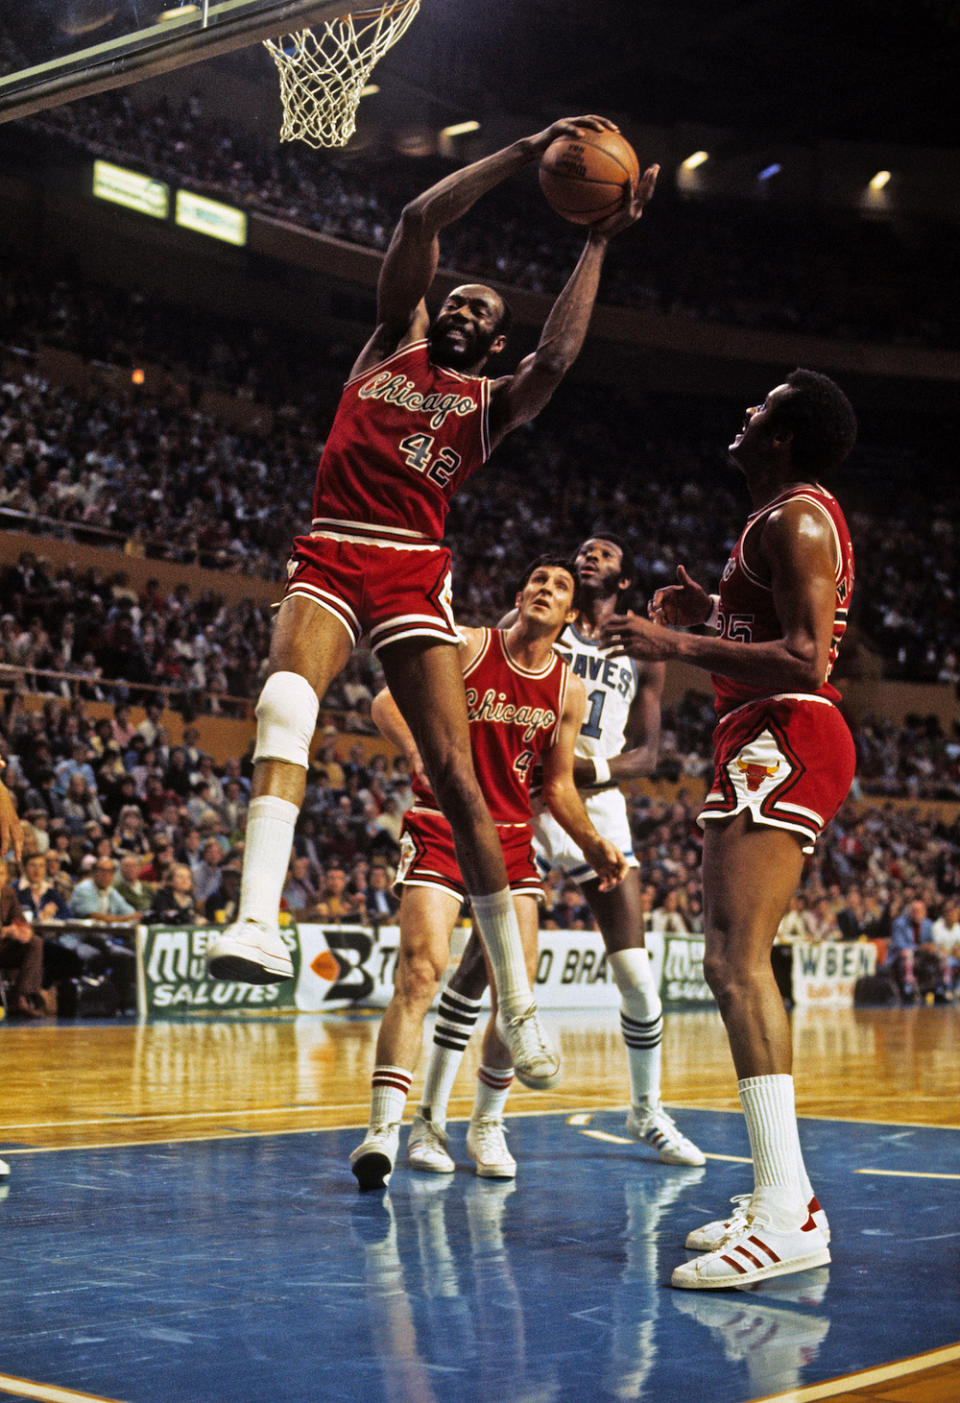 Nate Thurmond grabs a rebound during a game in 1974. (George Gojkovich/Getty Images)